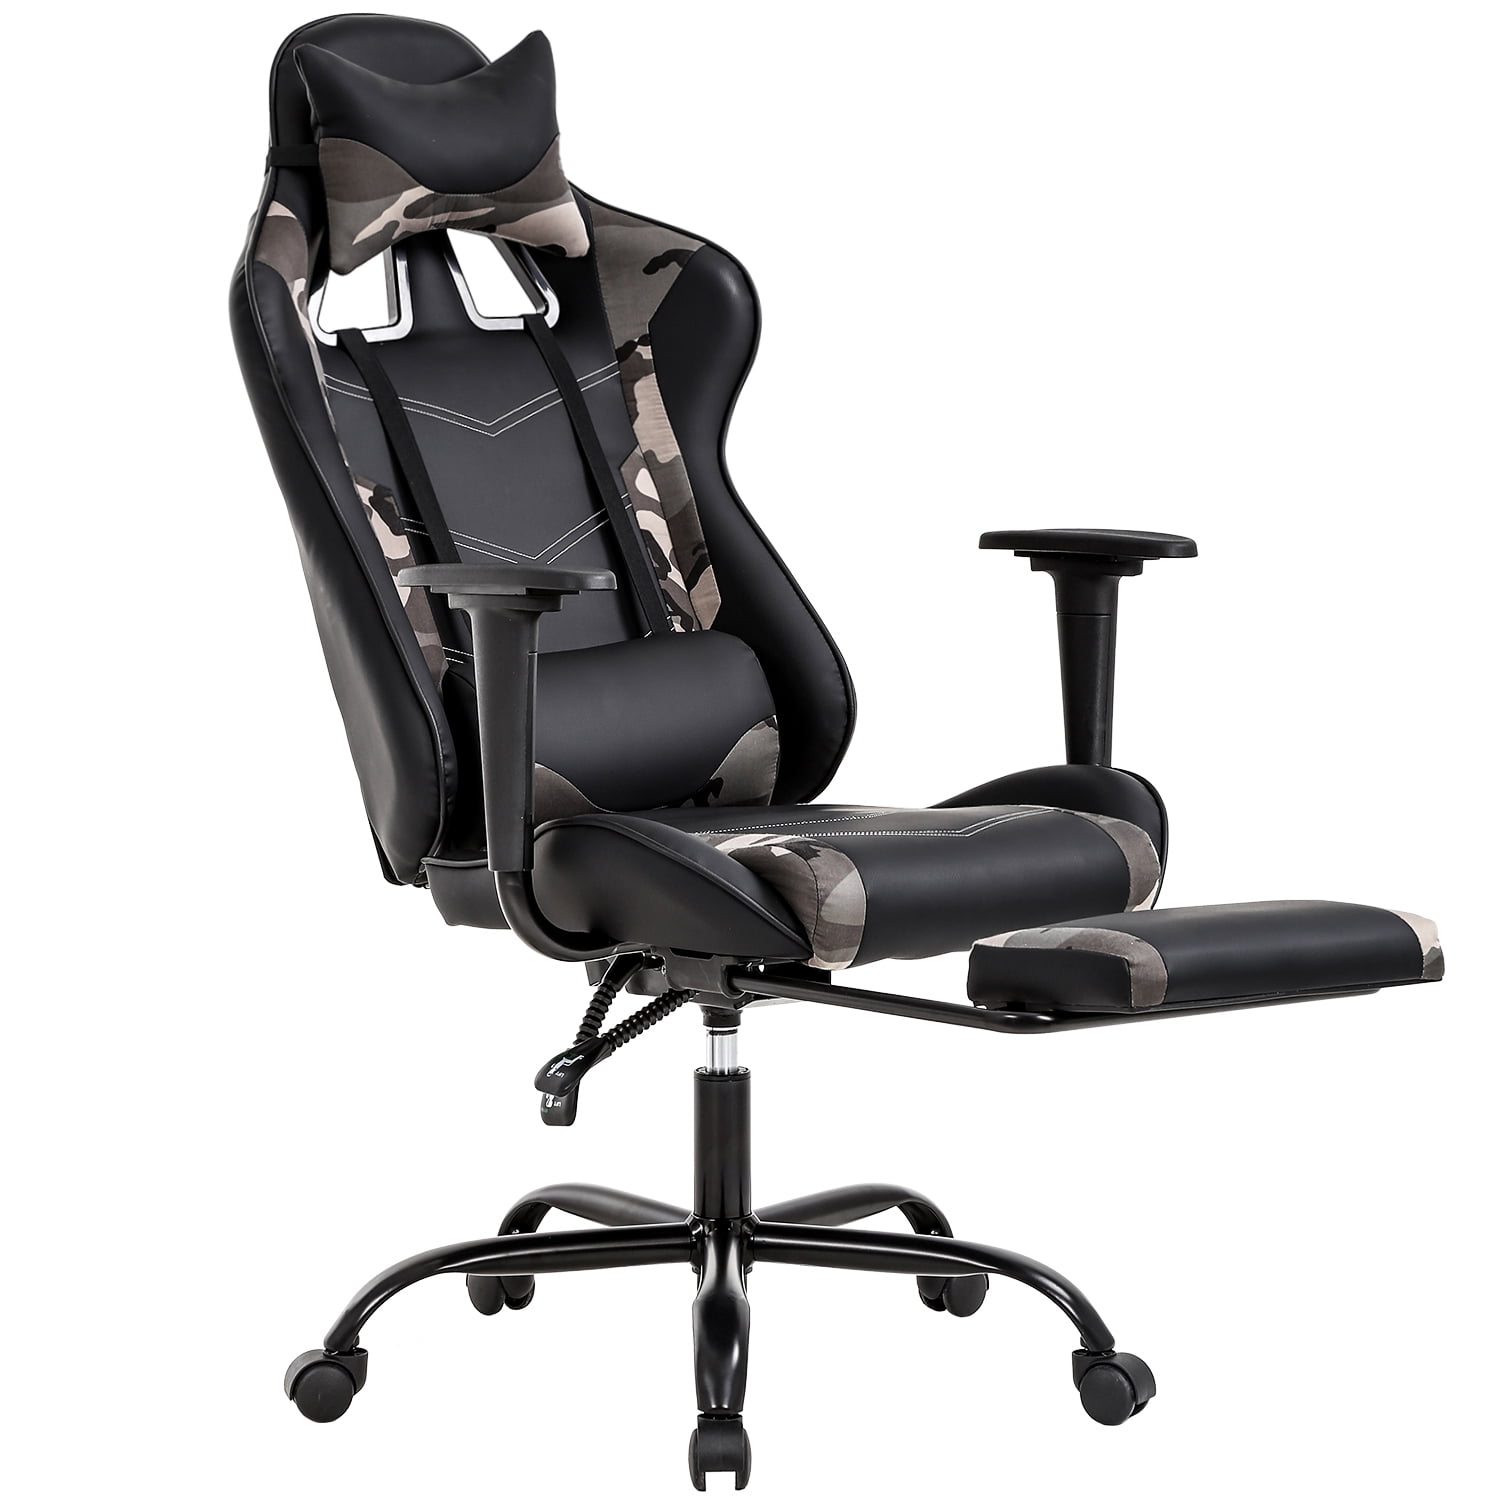 XPELKYS Gaming Office Chair Computer Desk Chair Racing Style High Back PU Leather Chair Executive and Ergonomic Style Swivel Chair with Headrest and Lumbar Support Blue-13